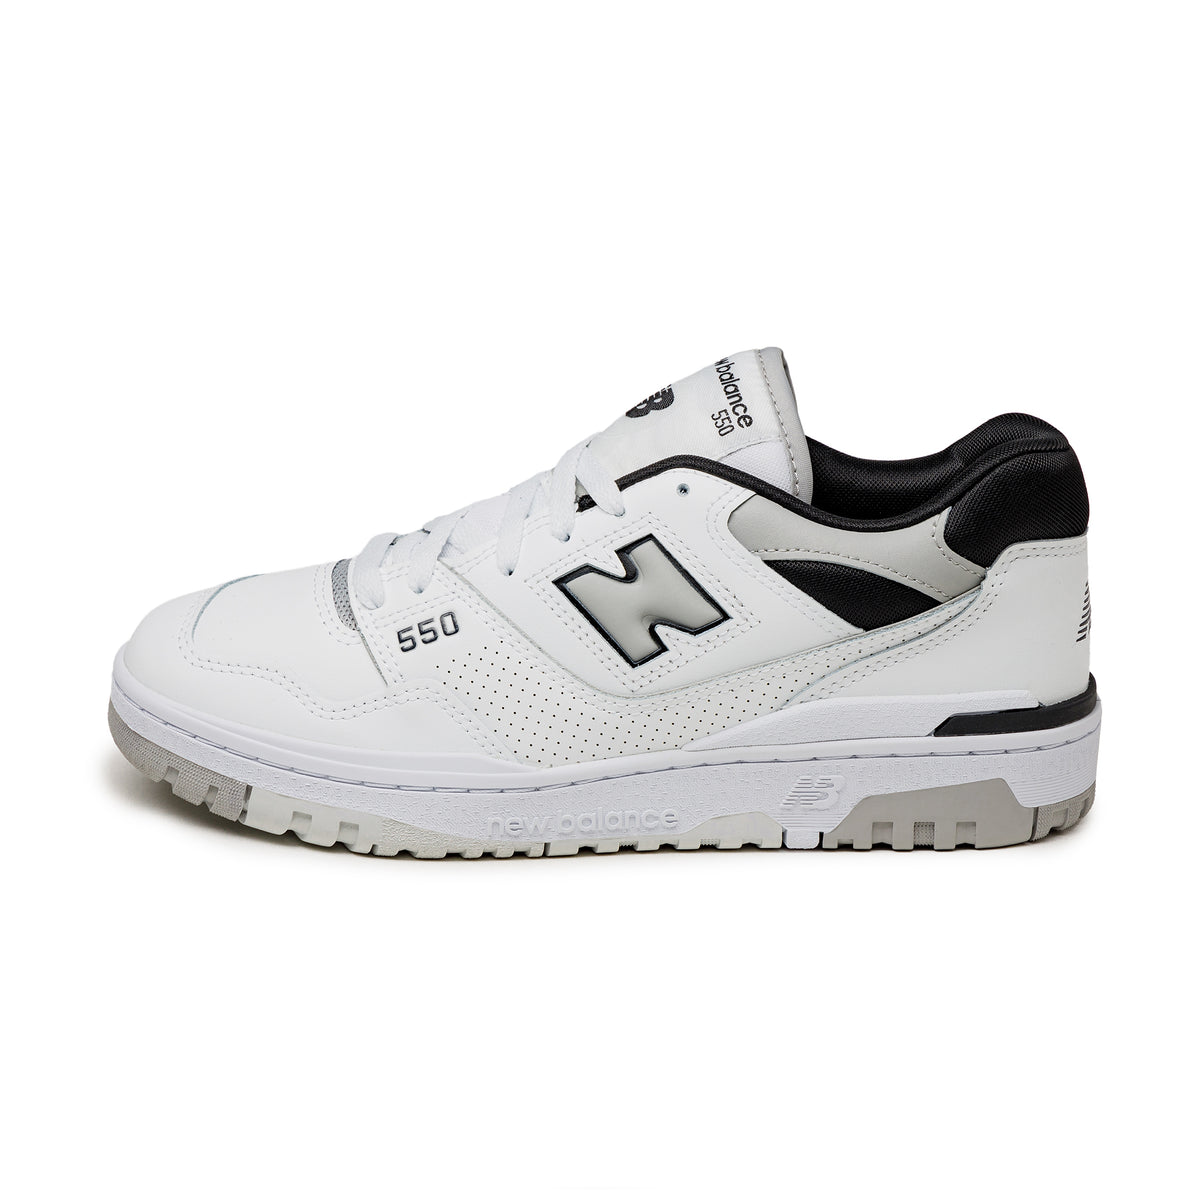 New Balance BB550NCL – buy now at Asphaltgold Online Store!